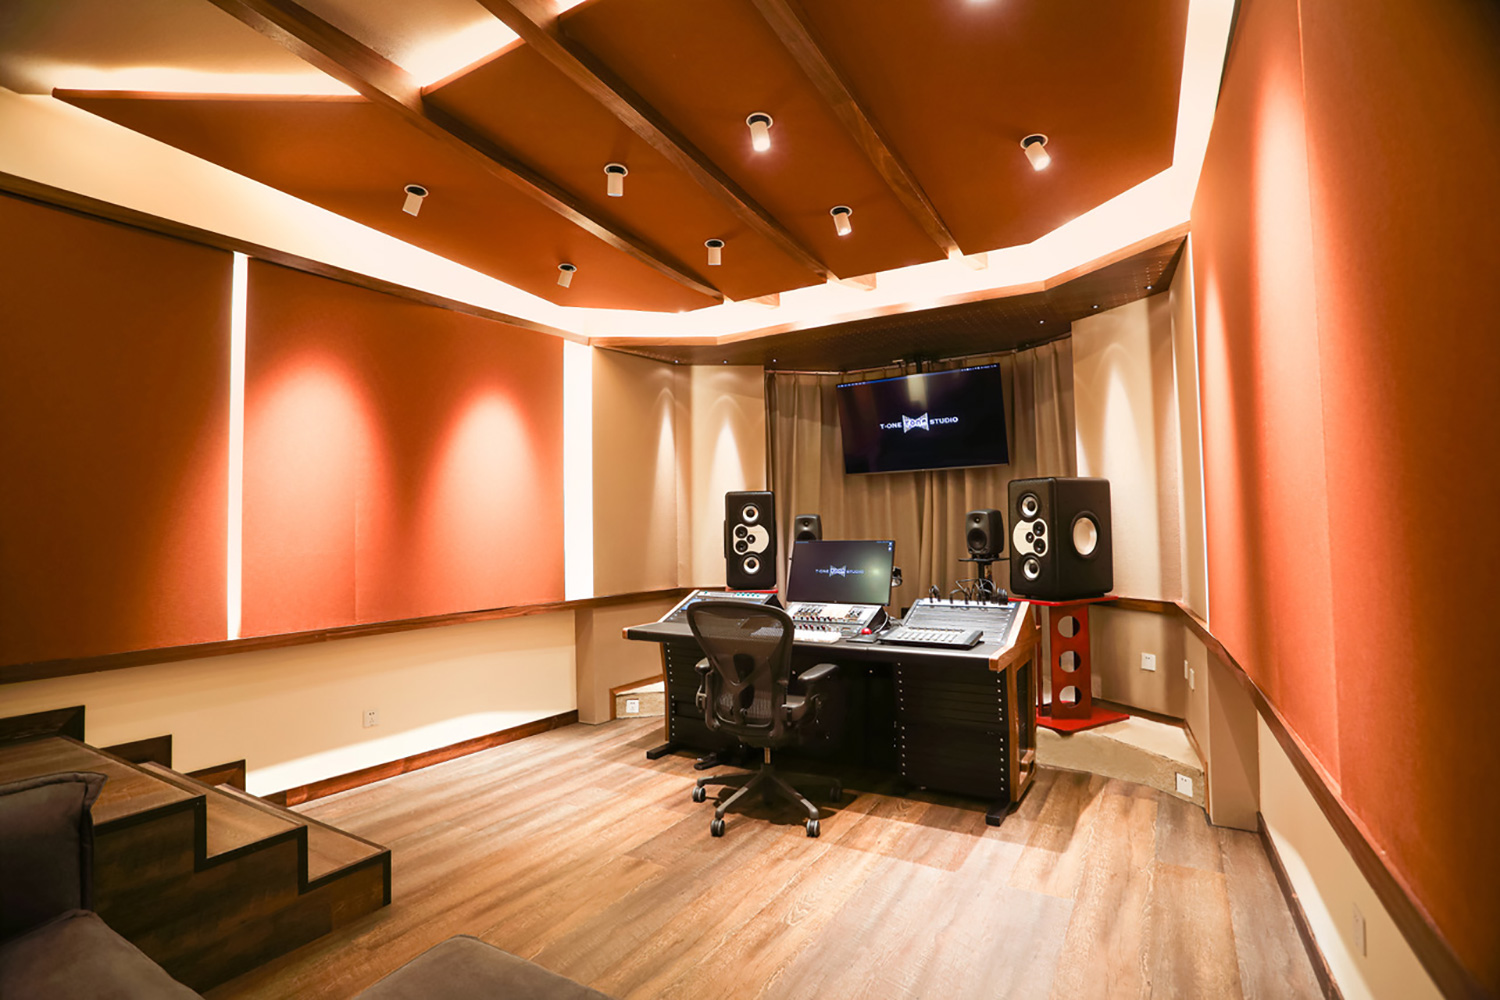 T-One Studios is the brainchild of engineers Qiwu Tan and Yi He located in Hohhot, China. WSDG’s services were retained to design this modern and cool world-class recording facility. Control Room.